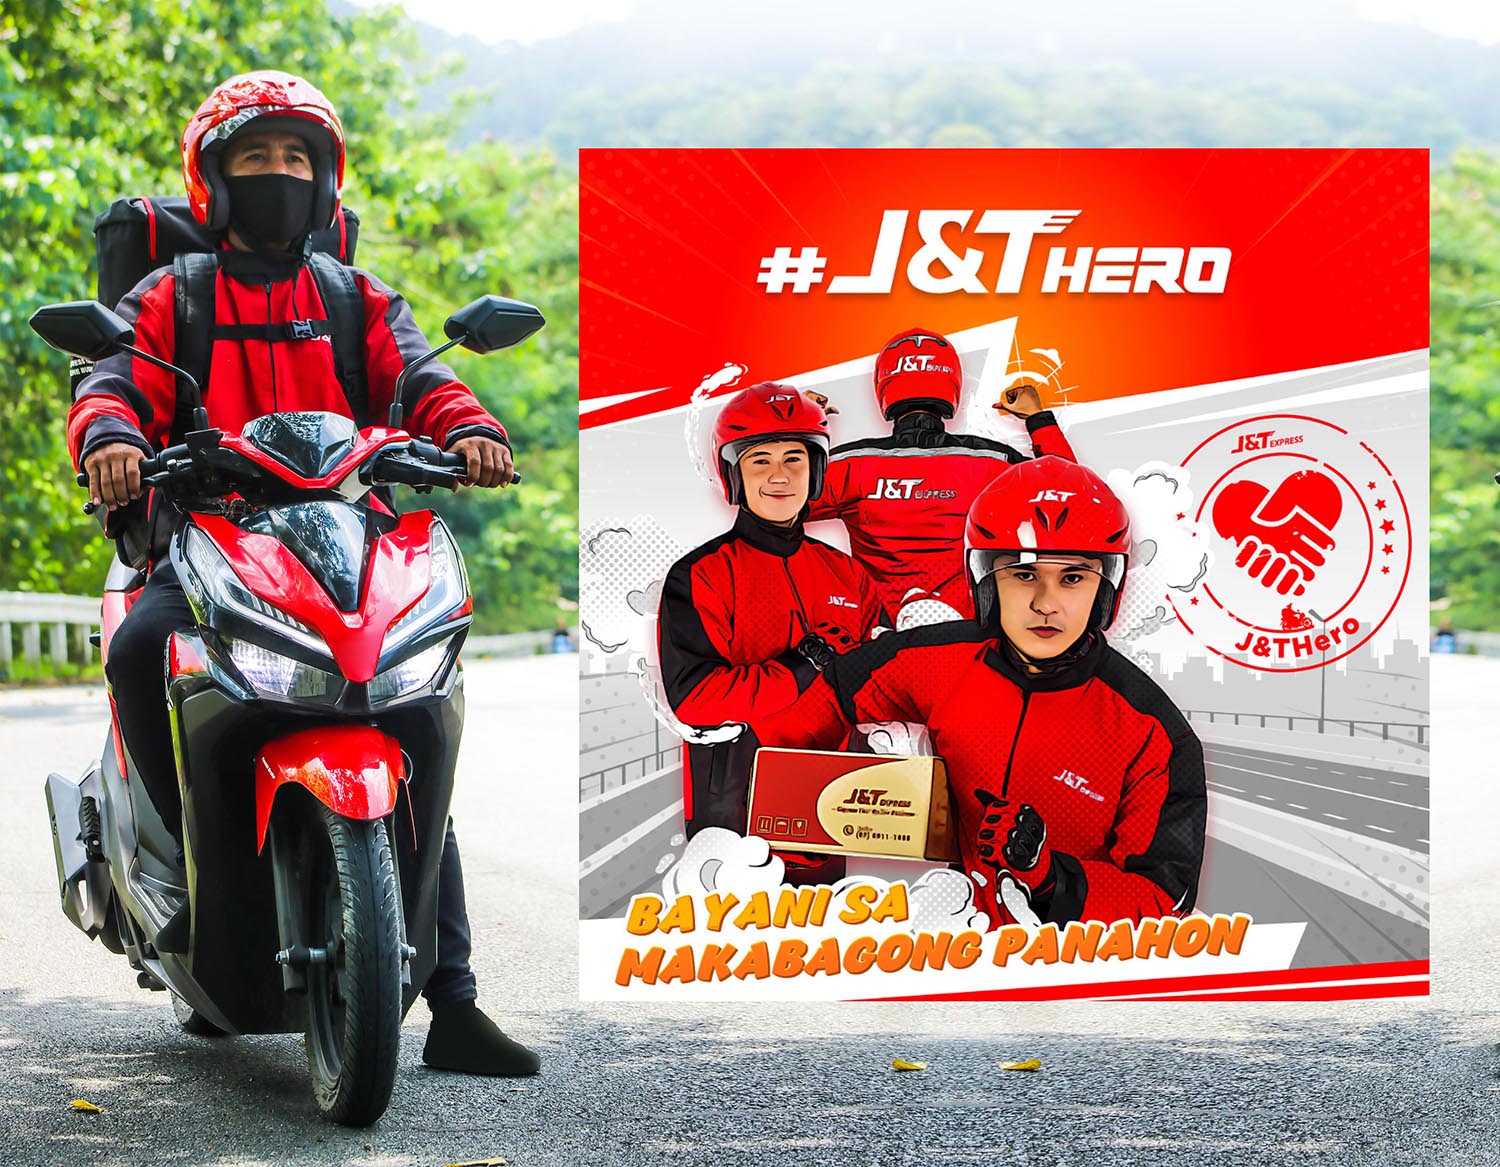 J&T Express to launch “Bayani sa Makabagong Panahon” campaign to honor riders as modern heroes on July 2